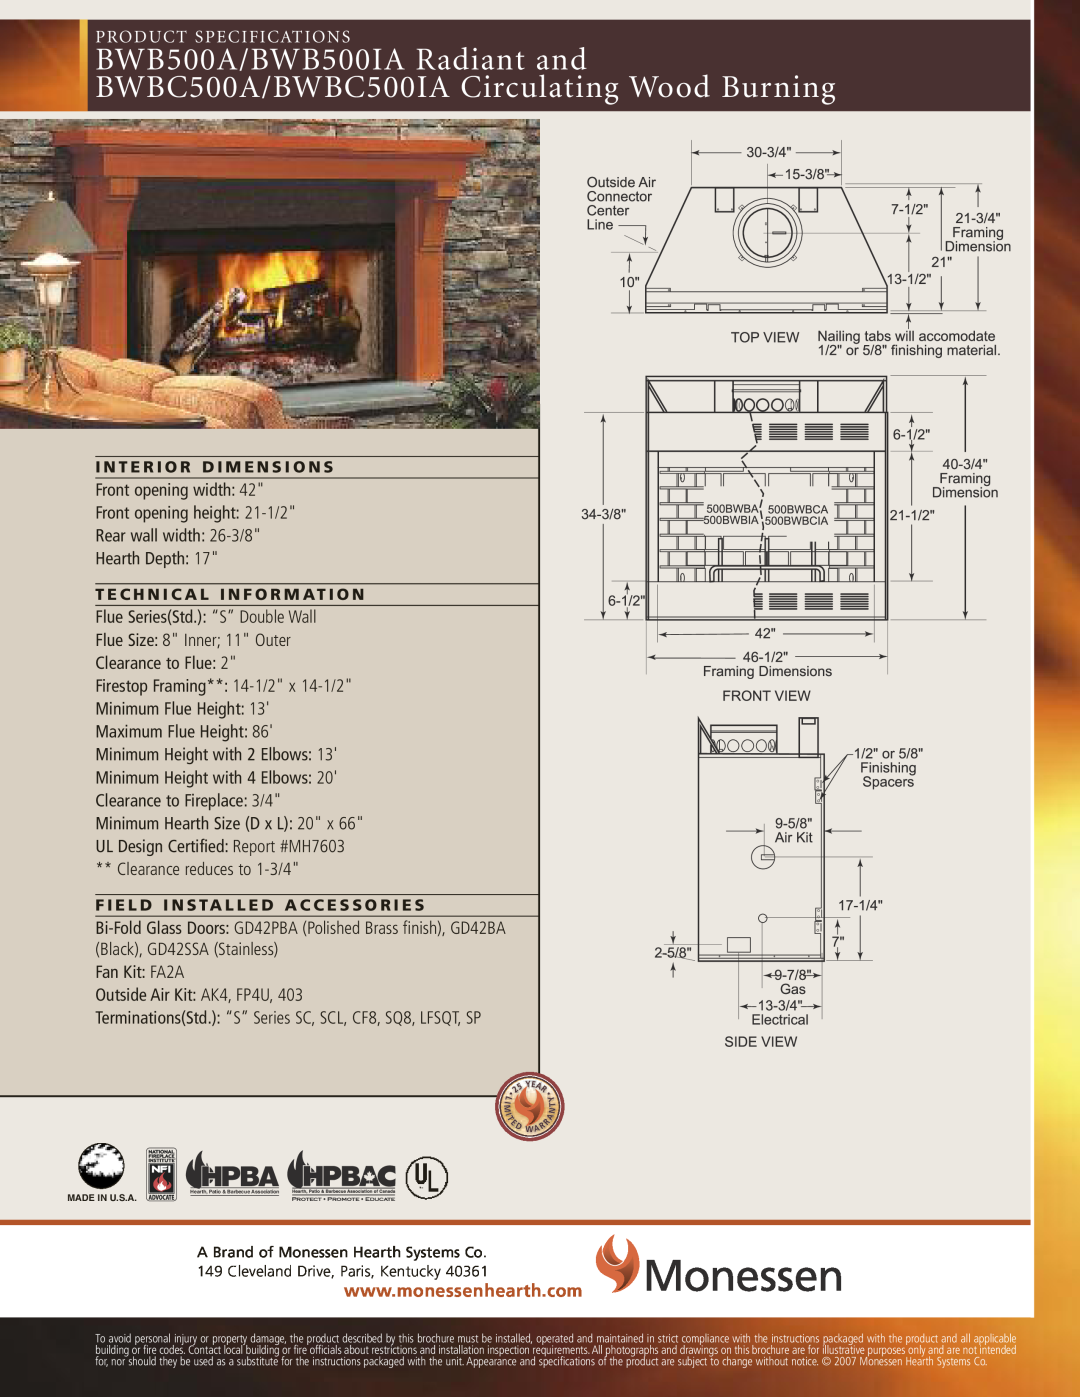 Monessen Hearth BWBC400IA, BWB400IA Hpba, Product Specifications, Flue Size 8 Inner 11 Outer, Clearance reduces to 1-3/4 